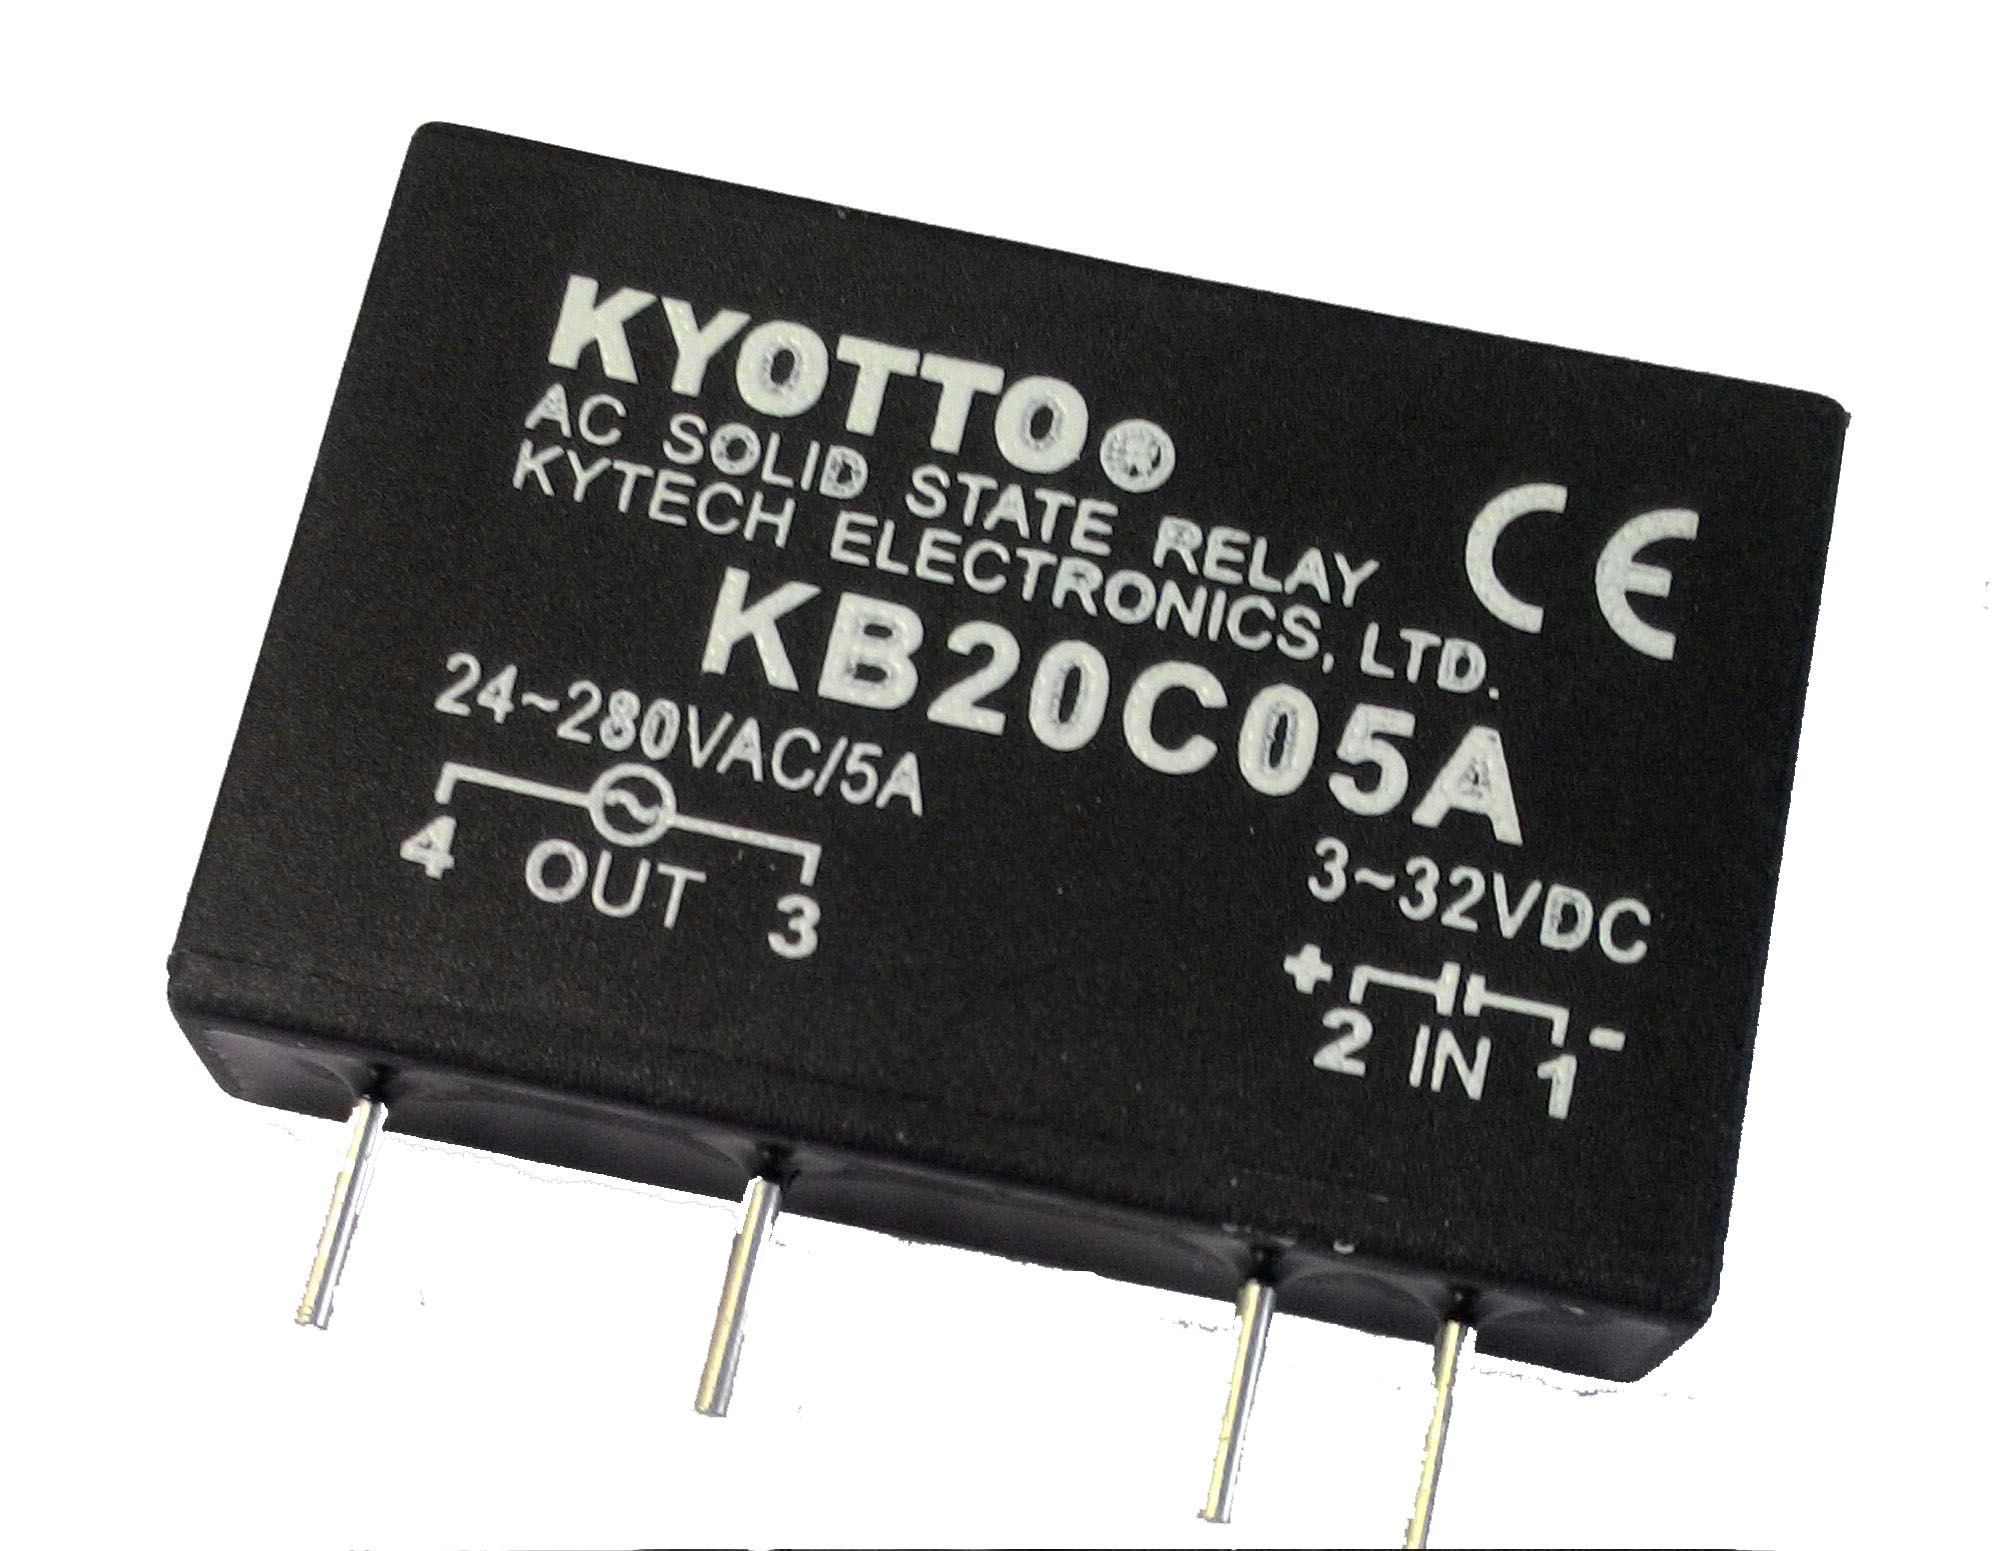 DC to AC 2pc KYOTTO AC Solid State Relay SSR DIP KB20C06A Load=24~ 280VAC 6A 